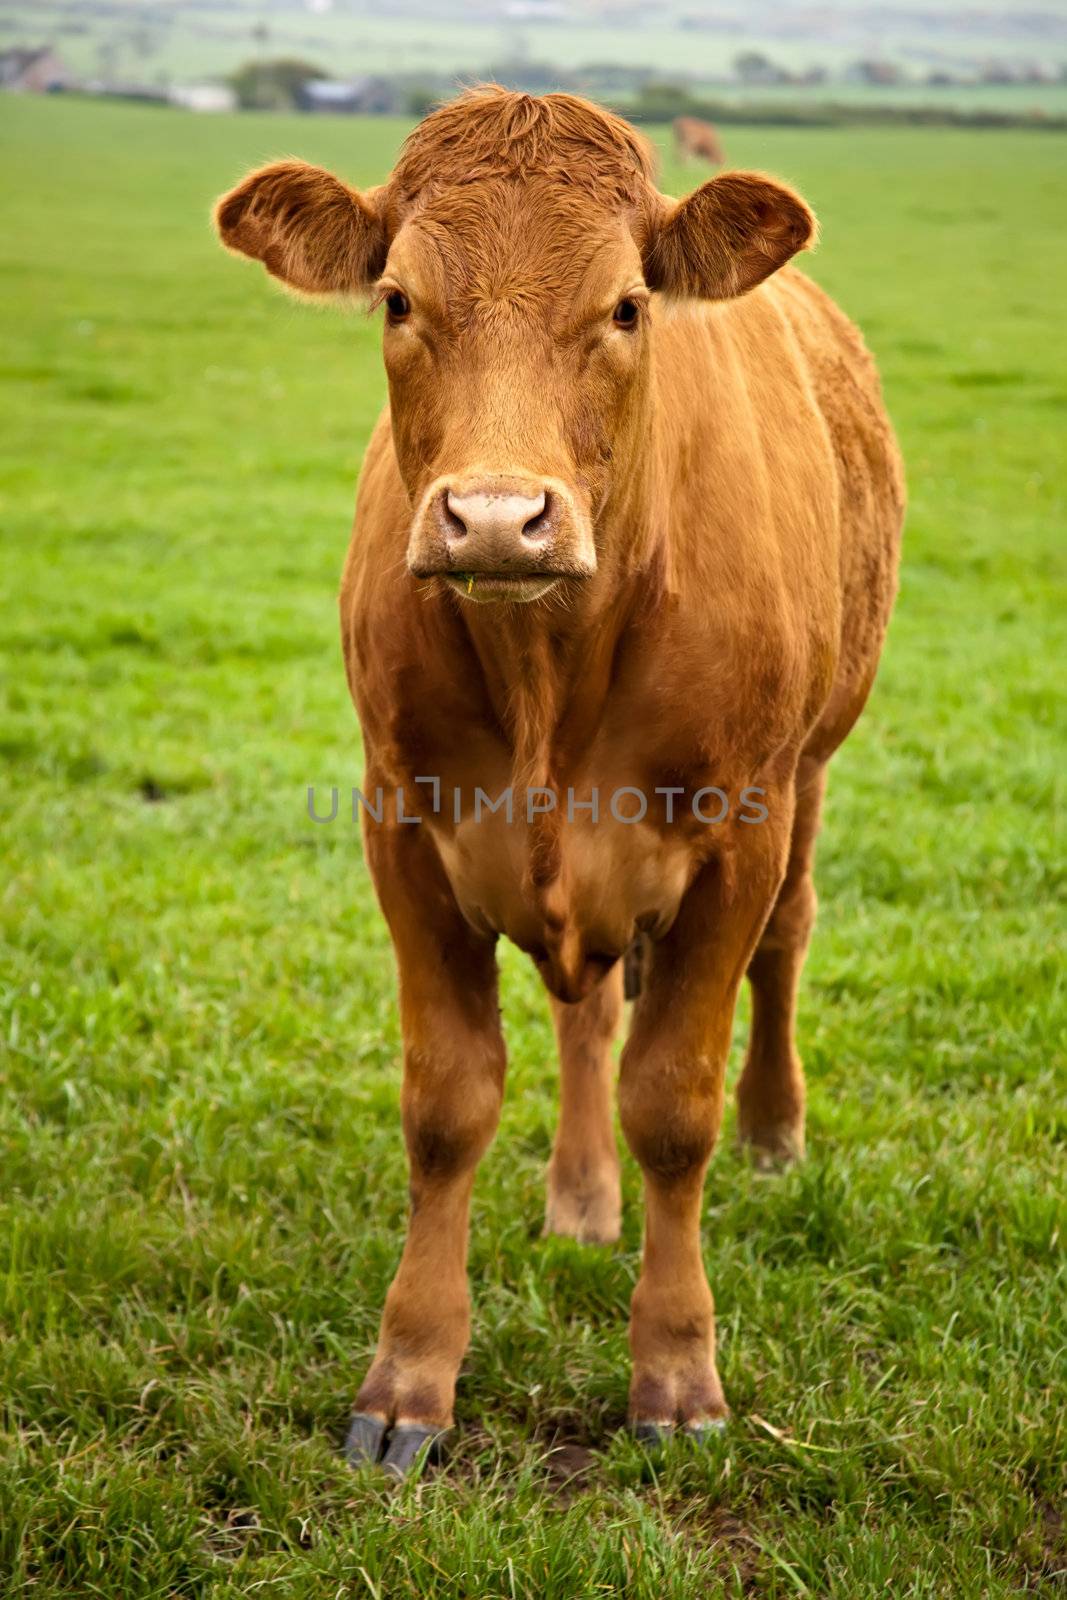 A brown cow standing in a green field and looking at the camera